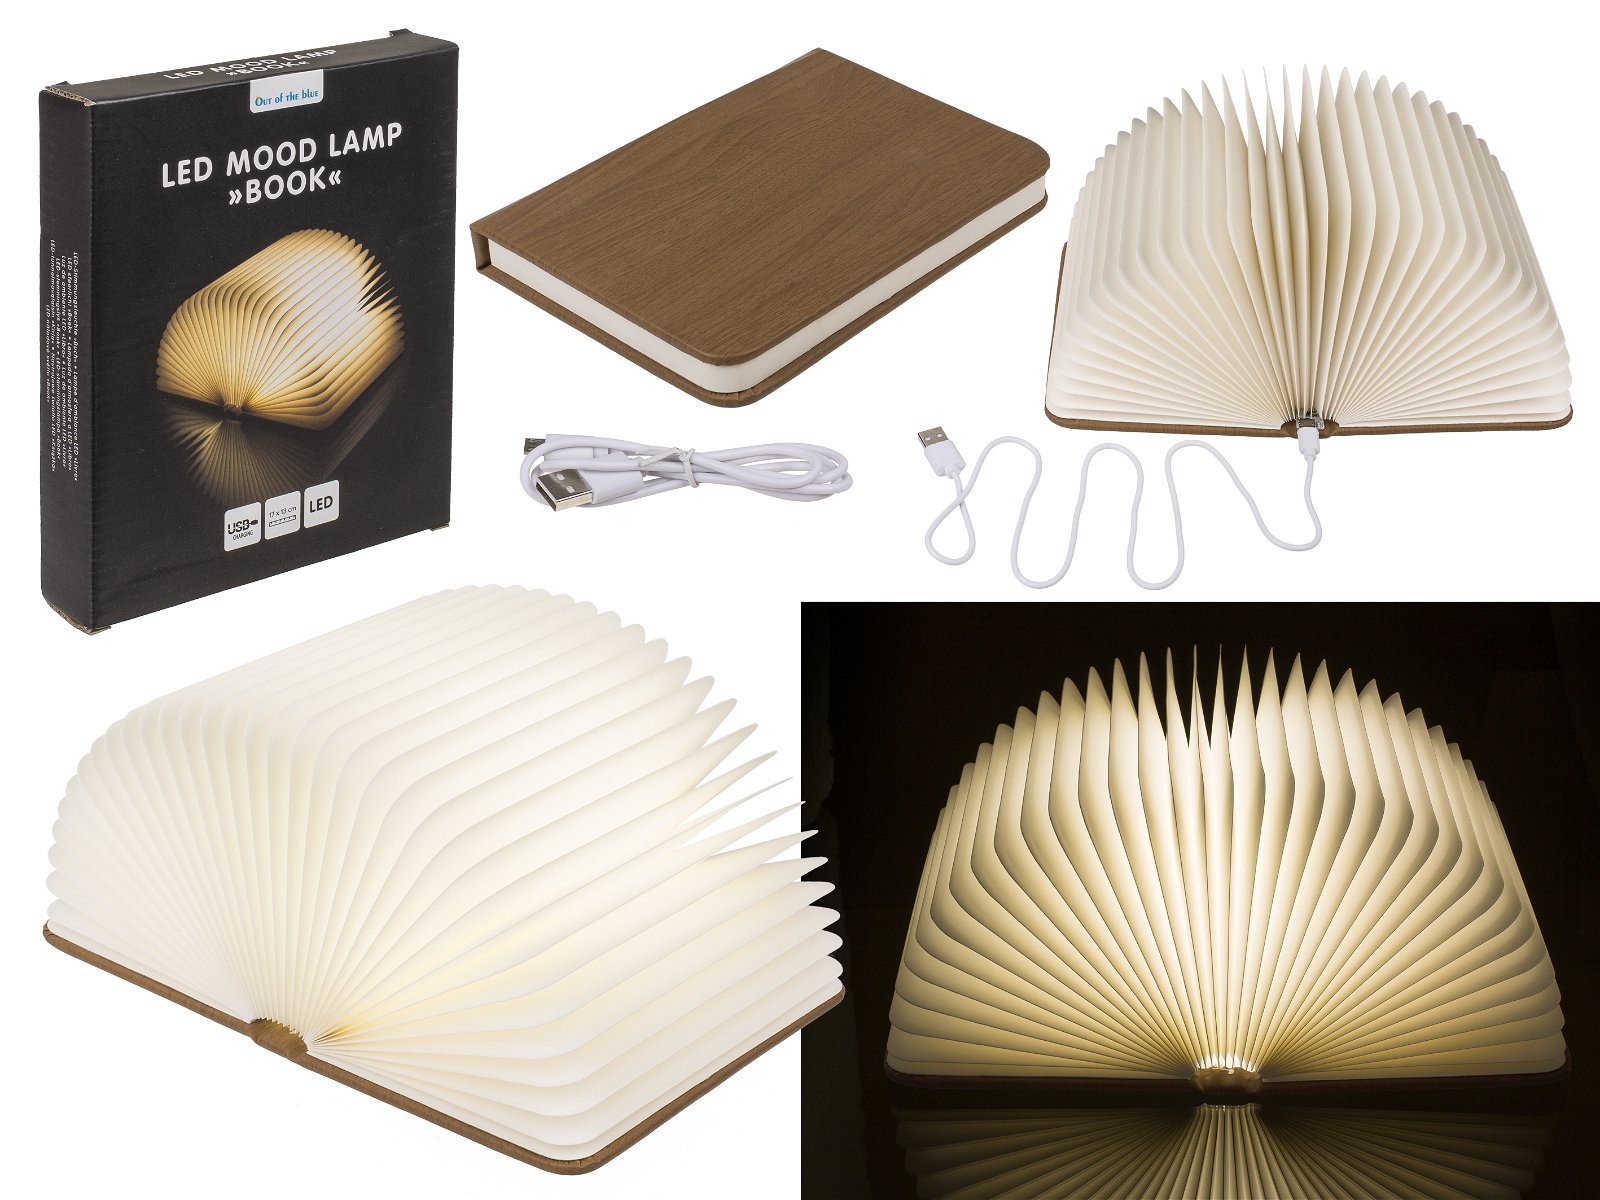 LED mood lamp, book, made of white plastic (W/H/D) 17x13x13cm with leatherette cover, USD cable